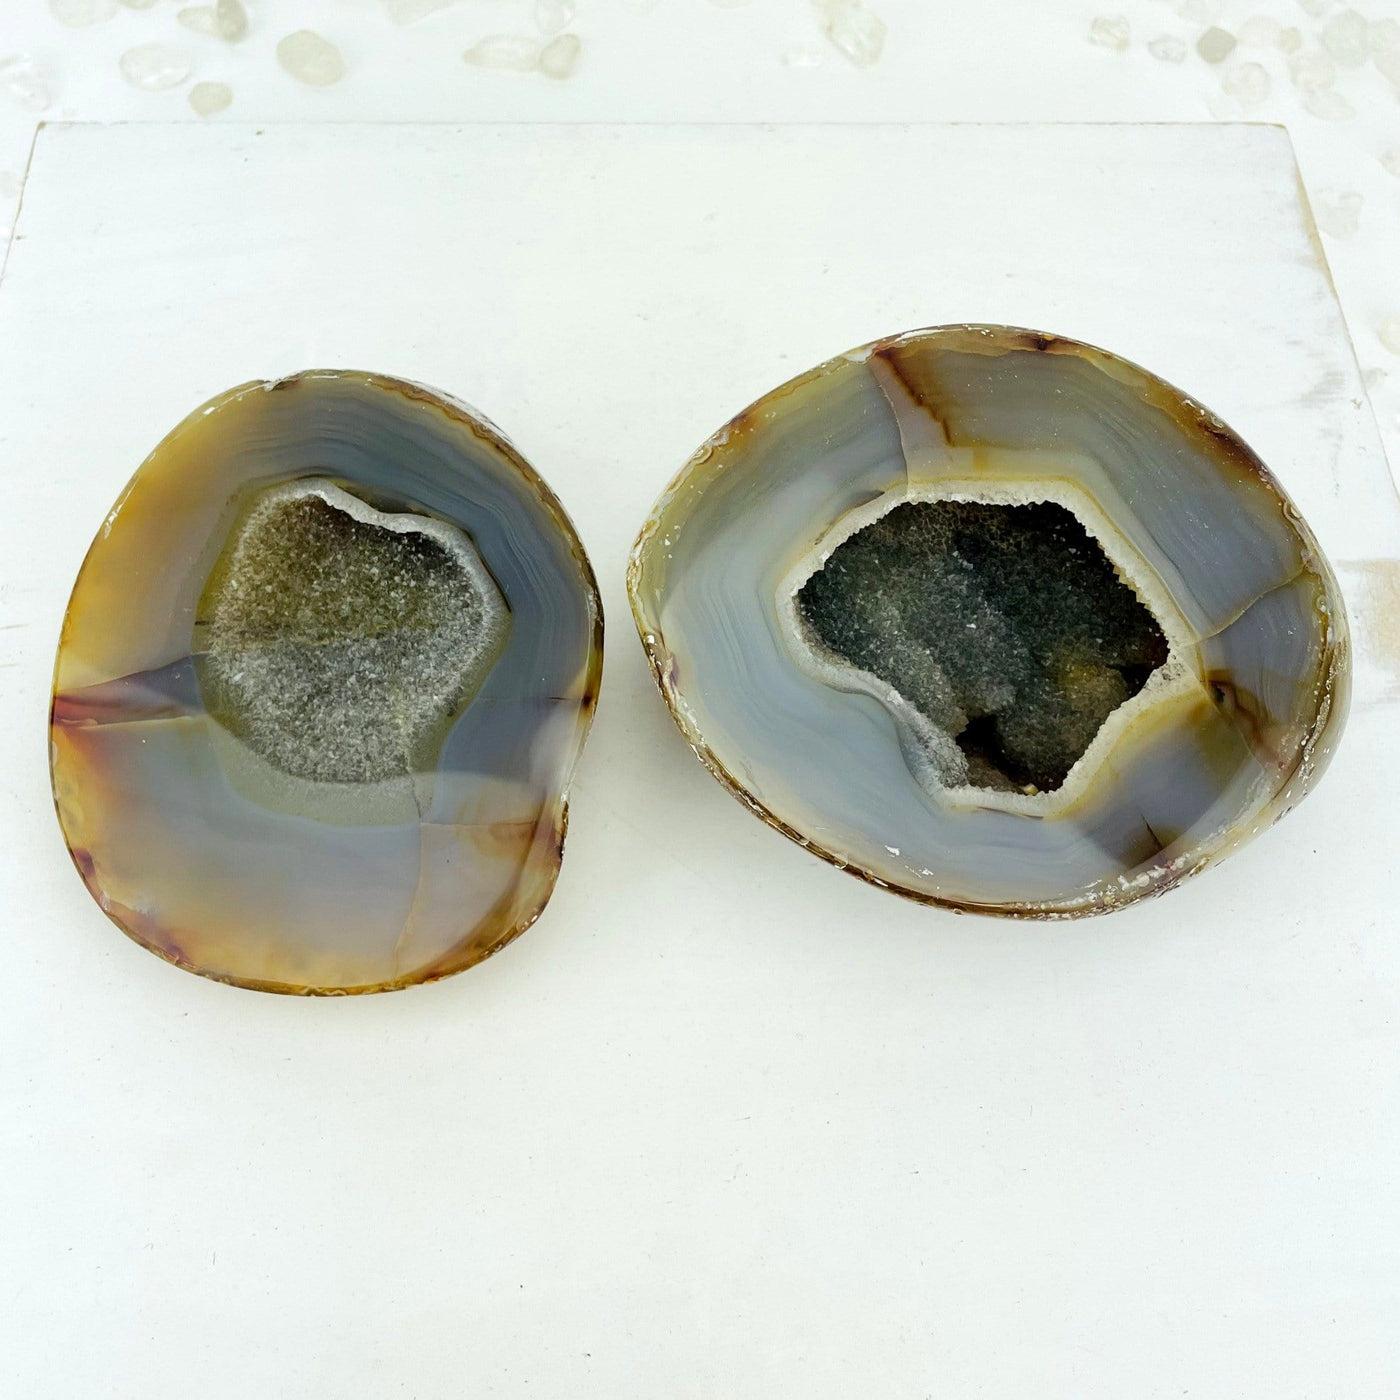 An open agate geode druzy box on a light colored background displaying the druzy and pattern.